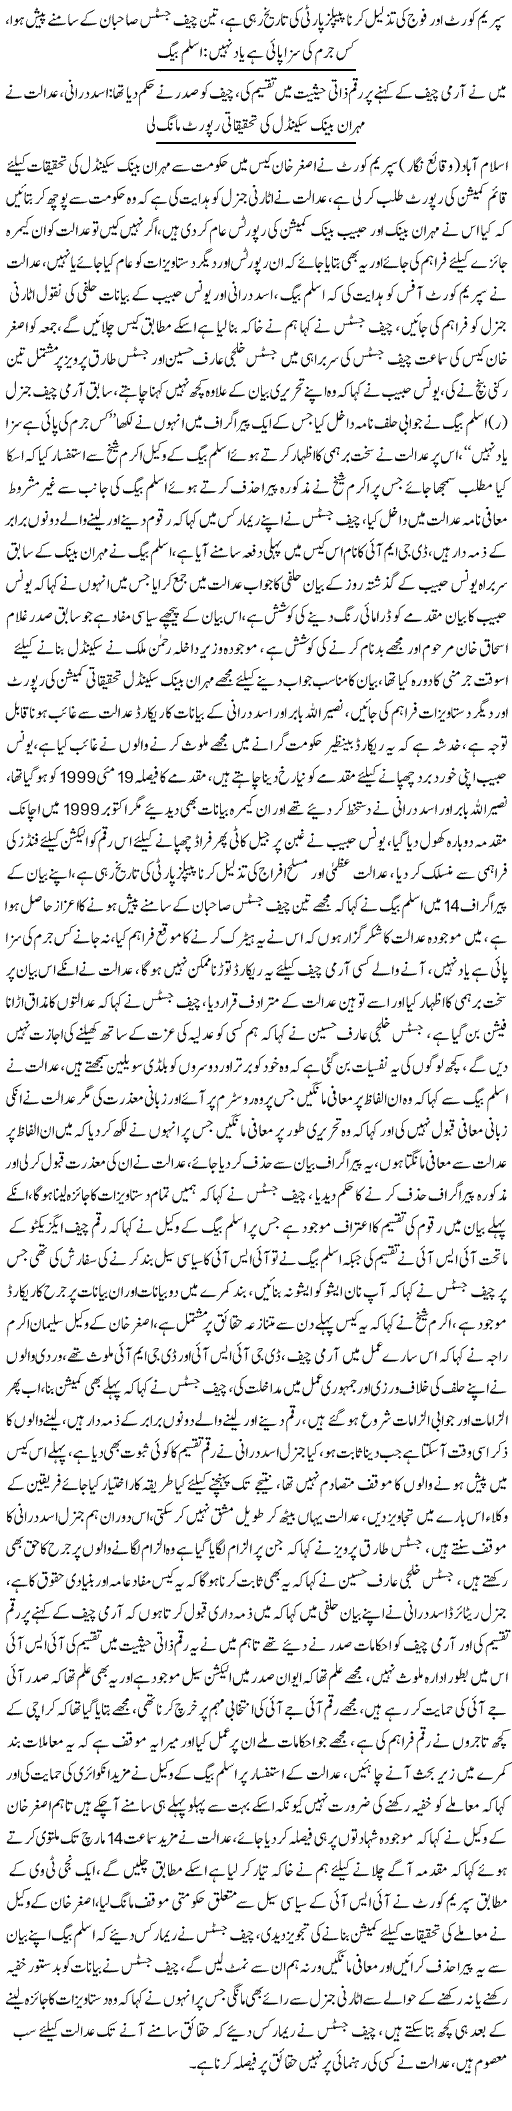 Those Who Given Money and Taken Are Equally Responsible CJ - News in Urdu